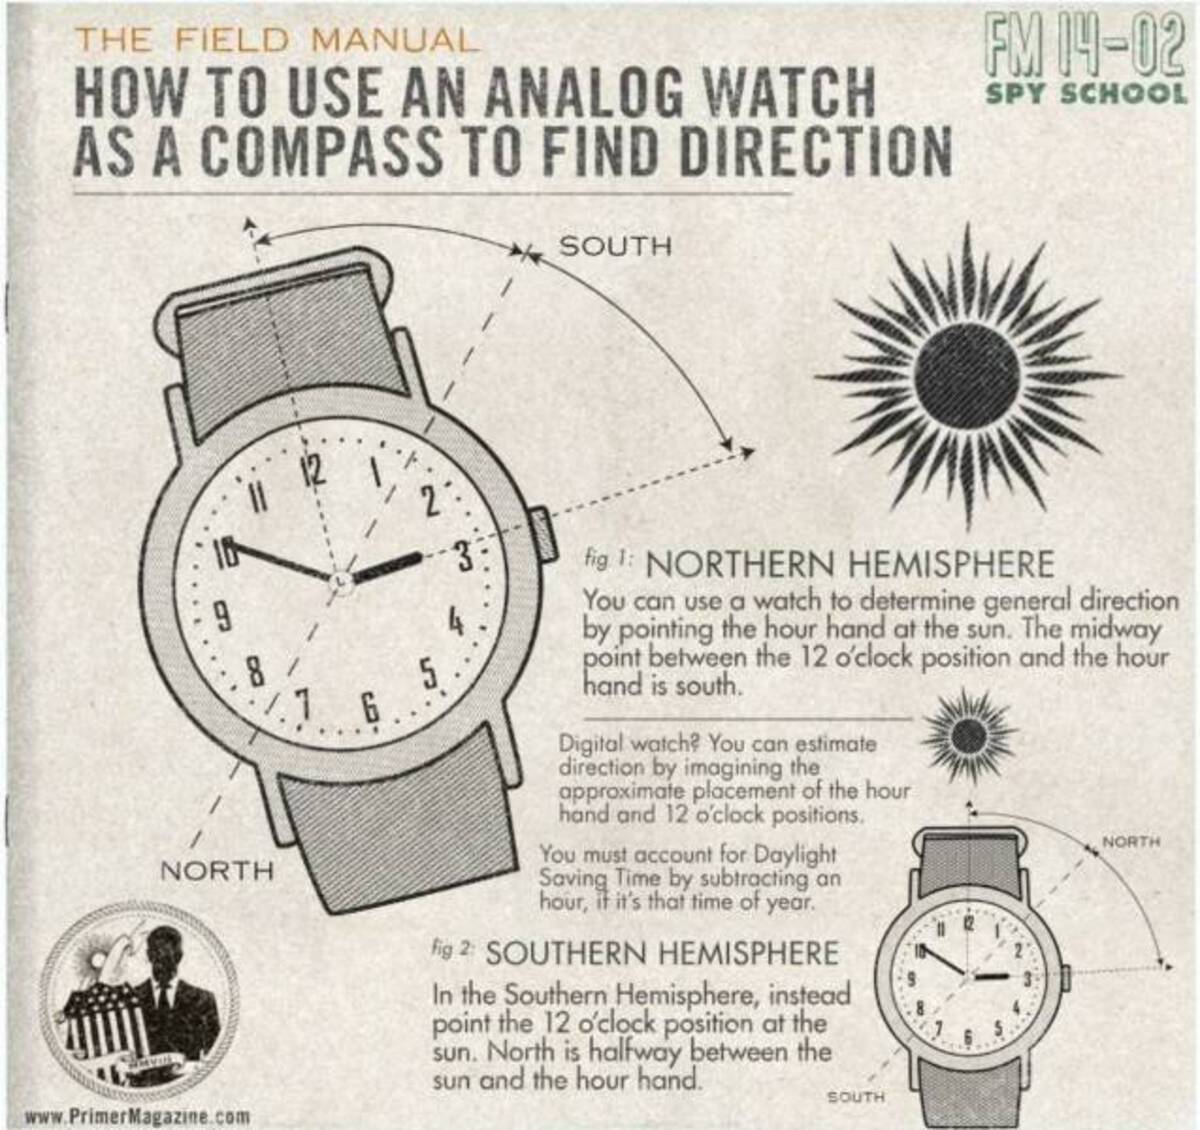 use a watch as a compass - The Field Manual How To Use An Analog Watch As A Compass To Find Direction 9 North 12 1 6 2 5 3 South fig 1 Northern Hemisphere You can use a watch to determine general direction by pointing the hour hand at the sun. The midway